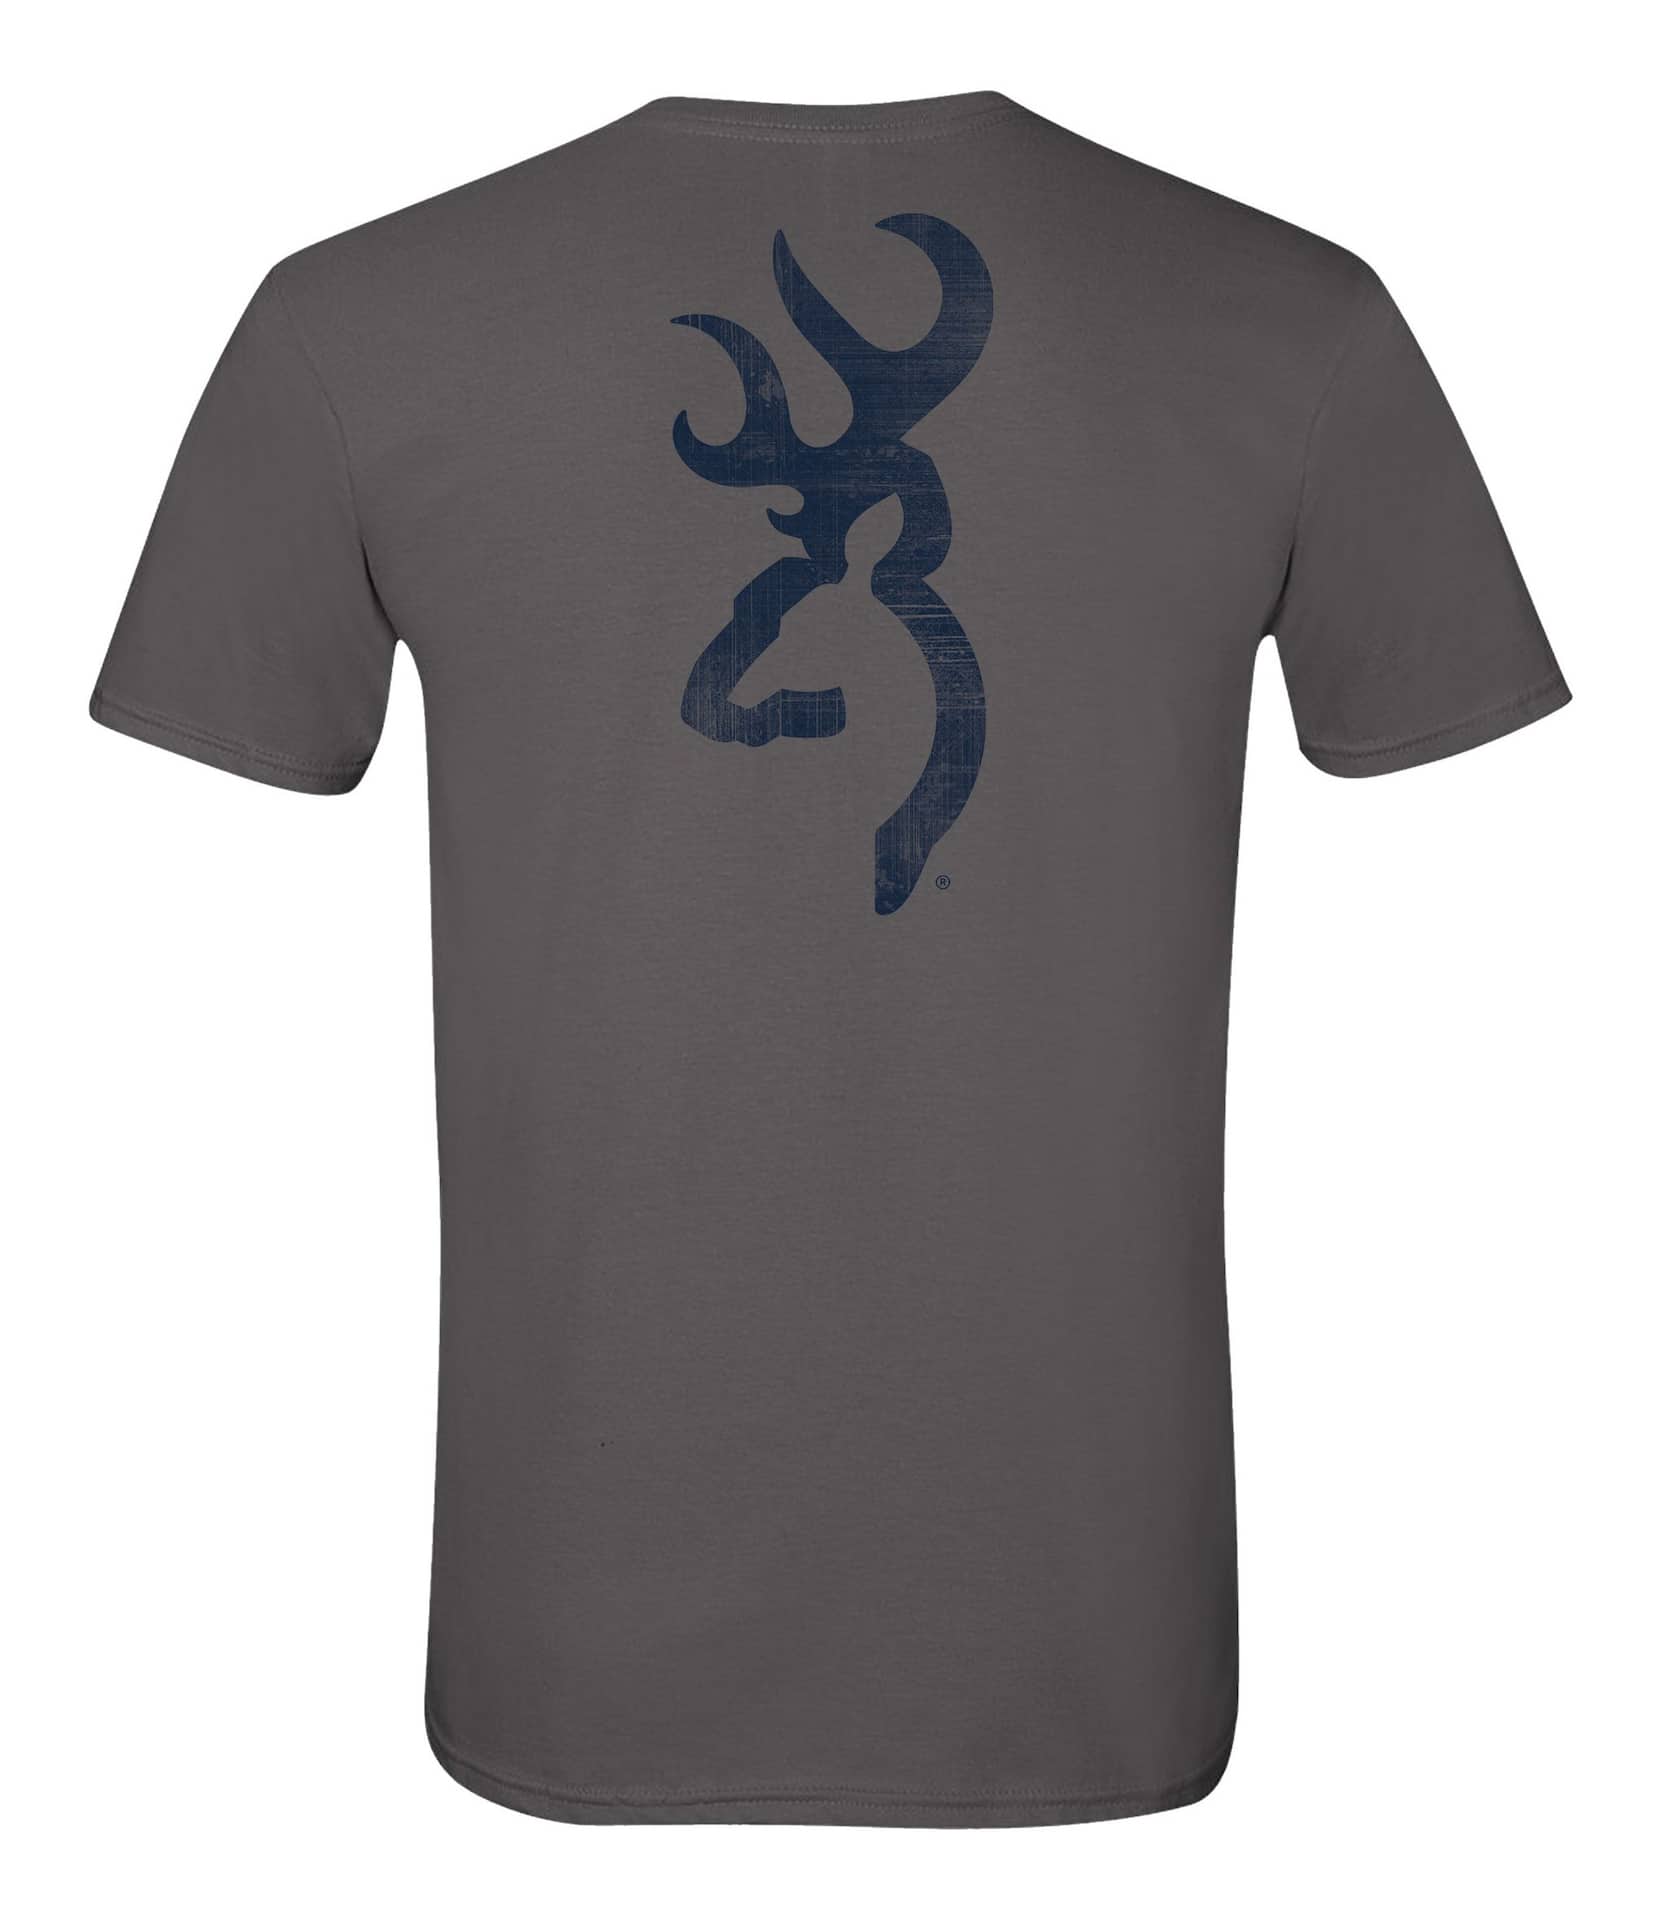 Browning Buckmark Cotton T-Shirt for Hunting/Camping/Hiking, Charcoal/Blue